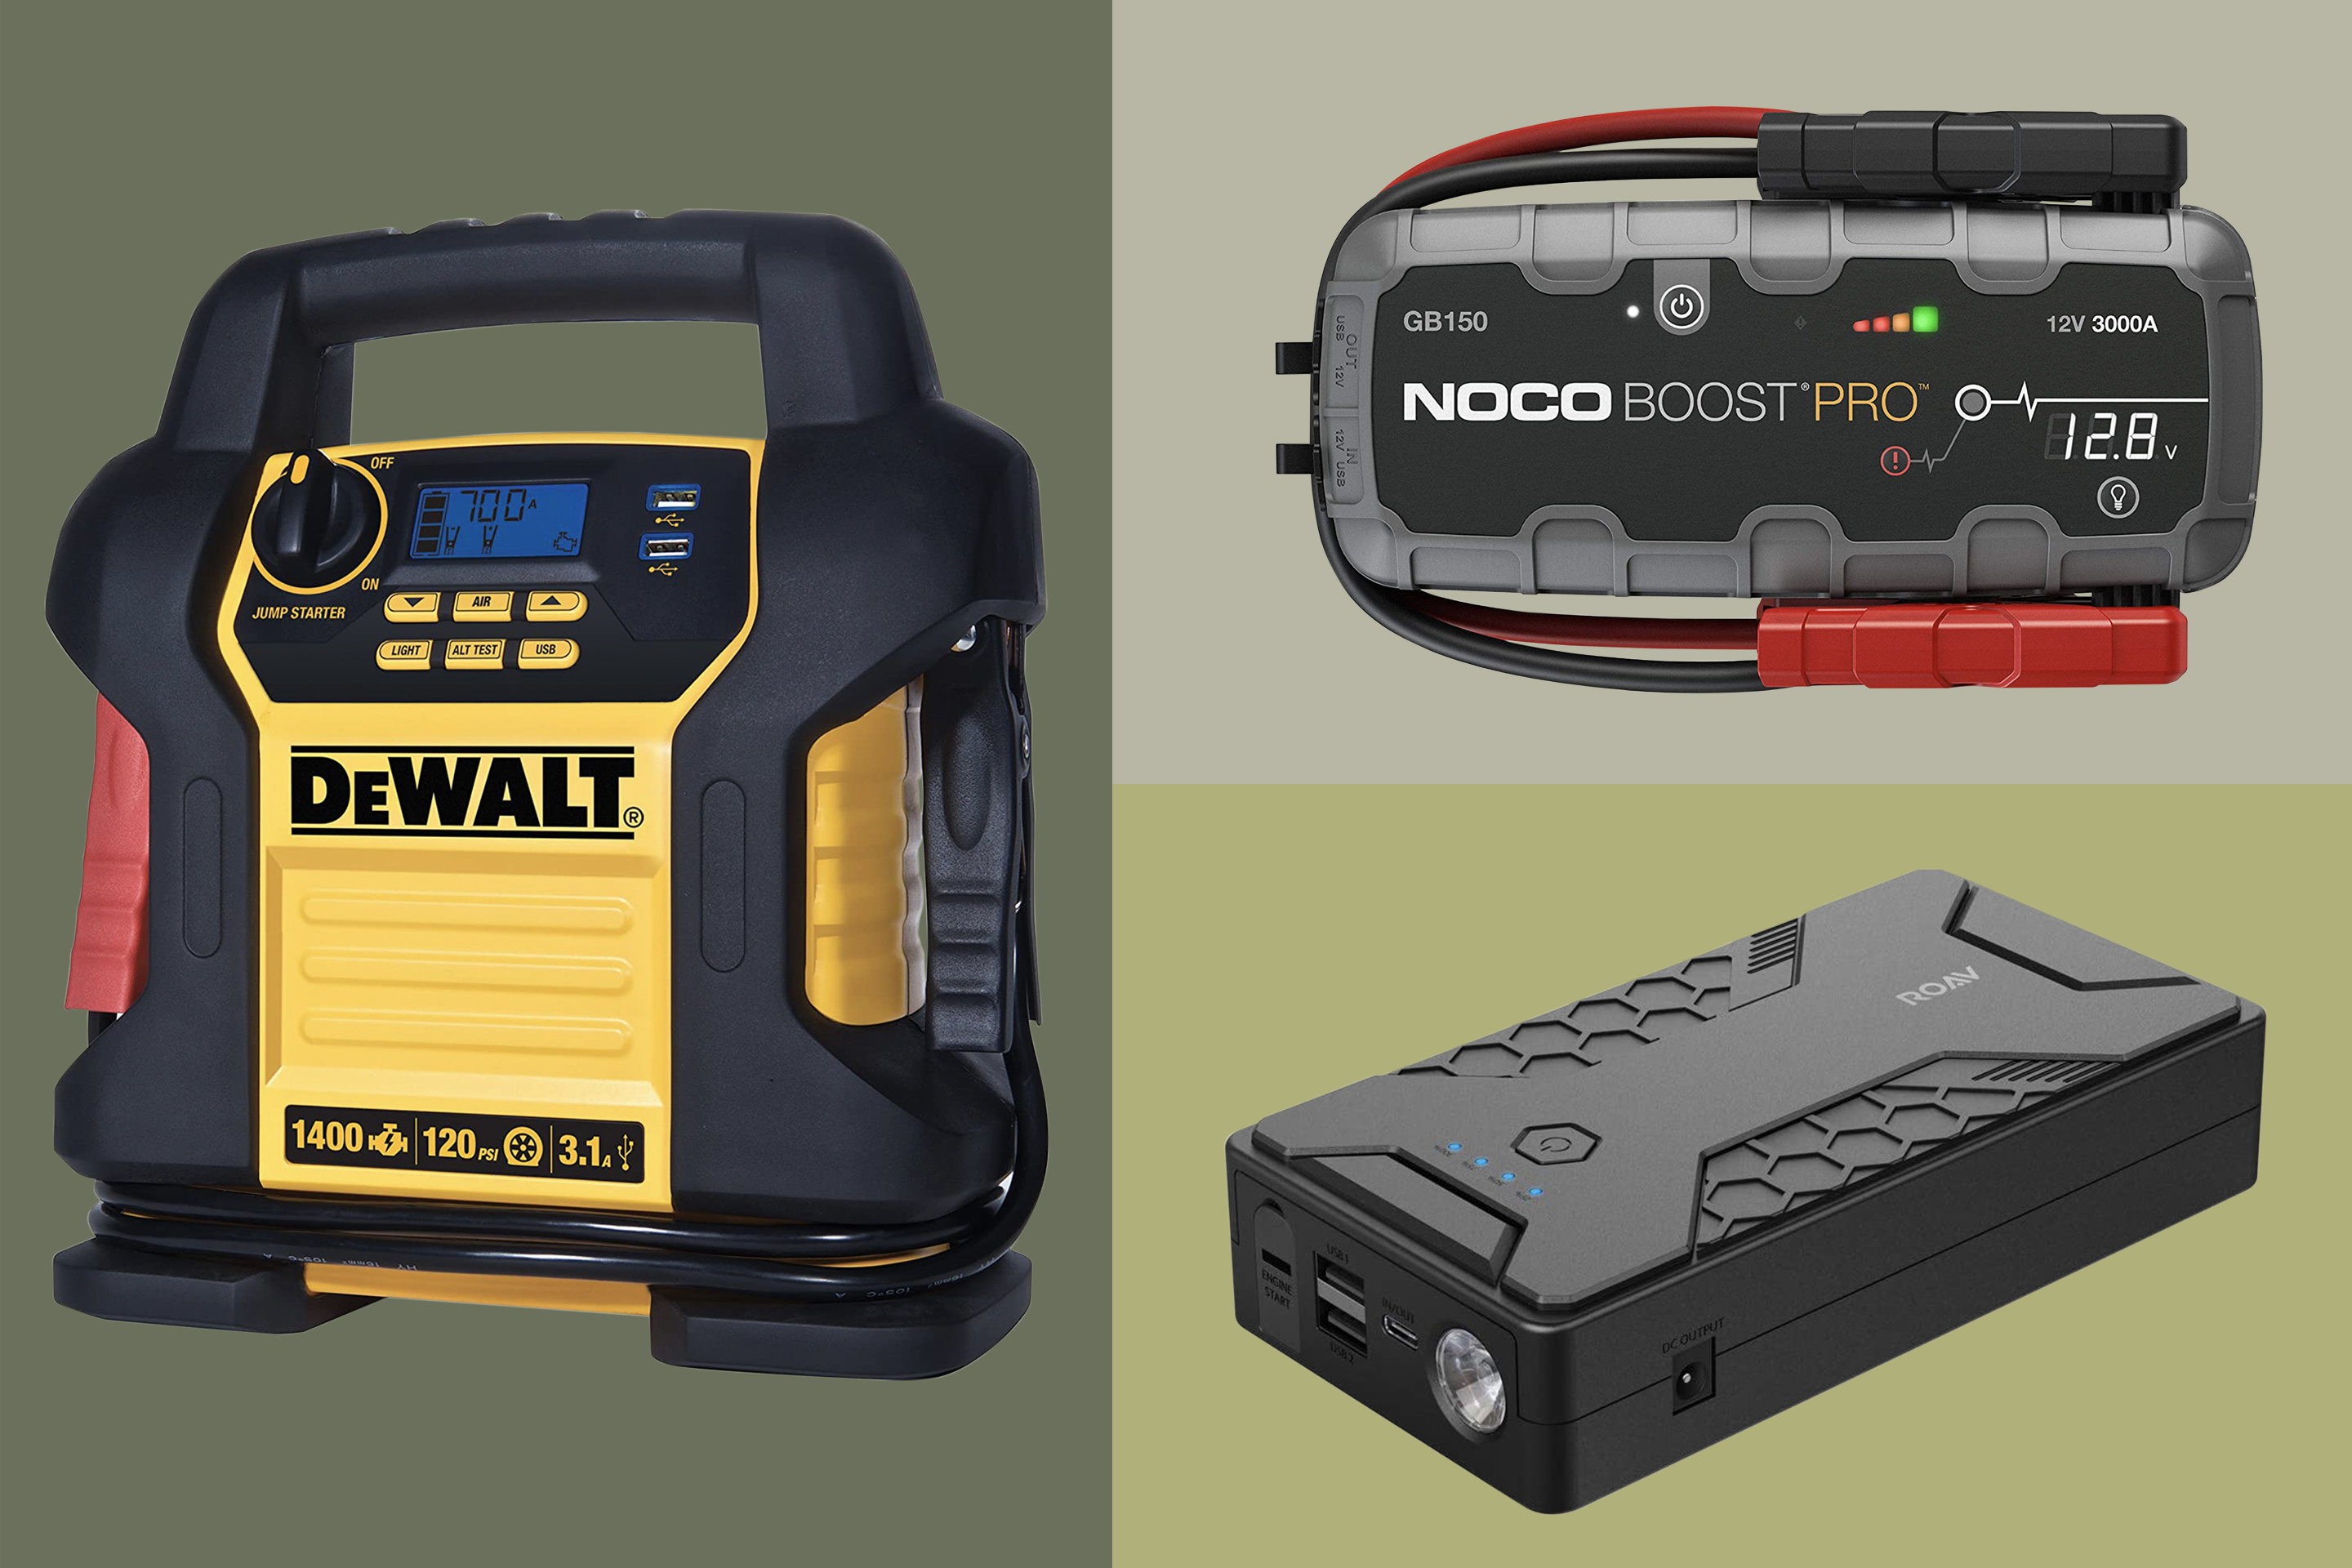 Will leaving a car jump starter constantly plugged in damage it,  specifically a Dewalt 1400 Peak amp charger? - Quora